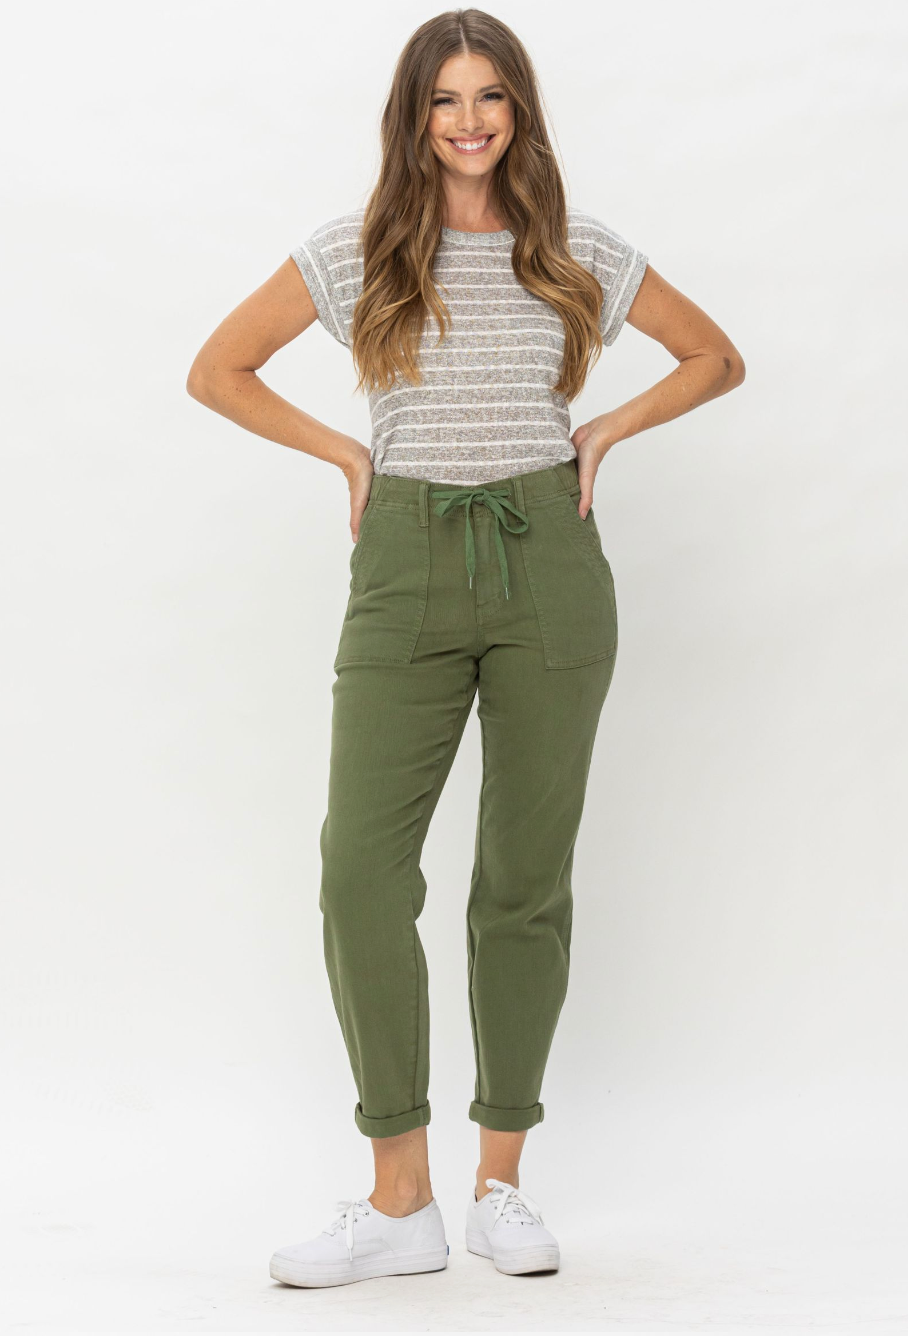 Judy Blue High Waist Joggers in Olive